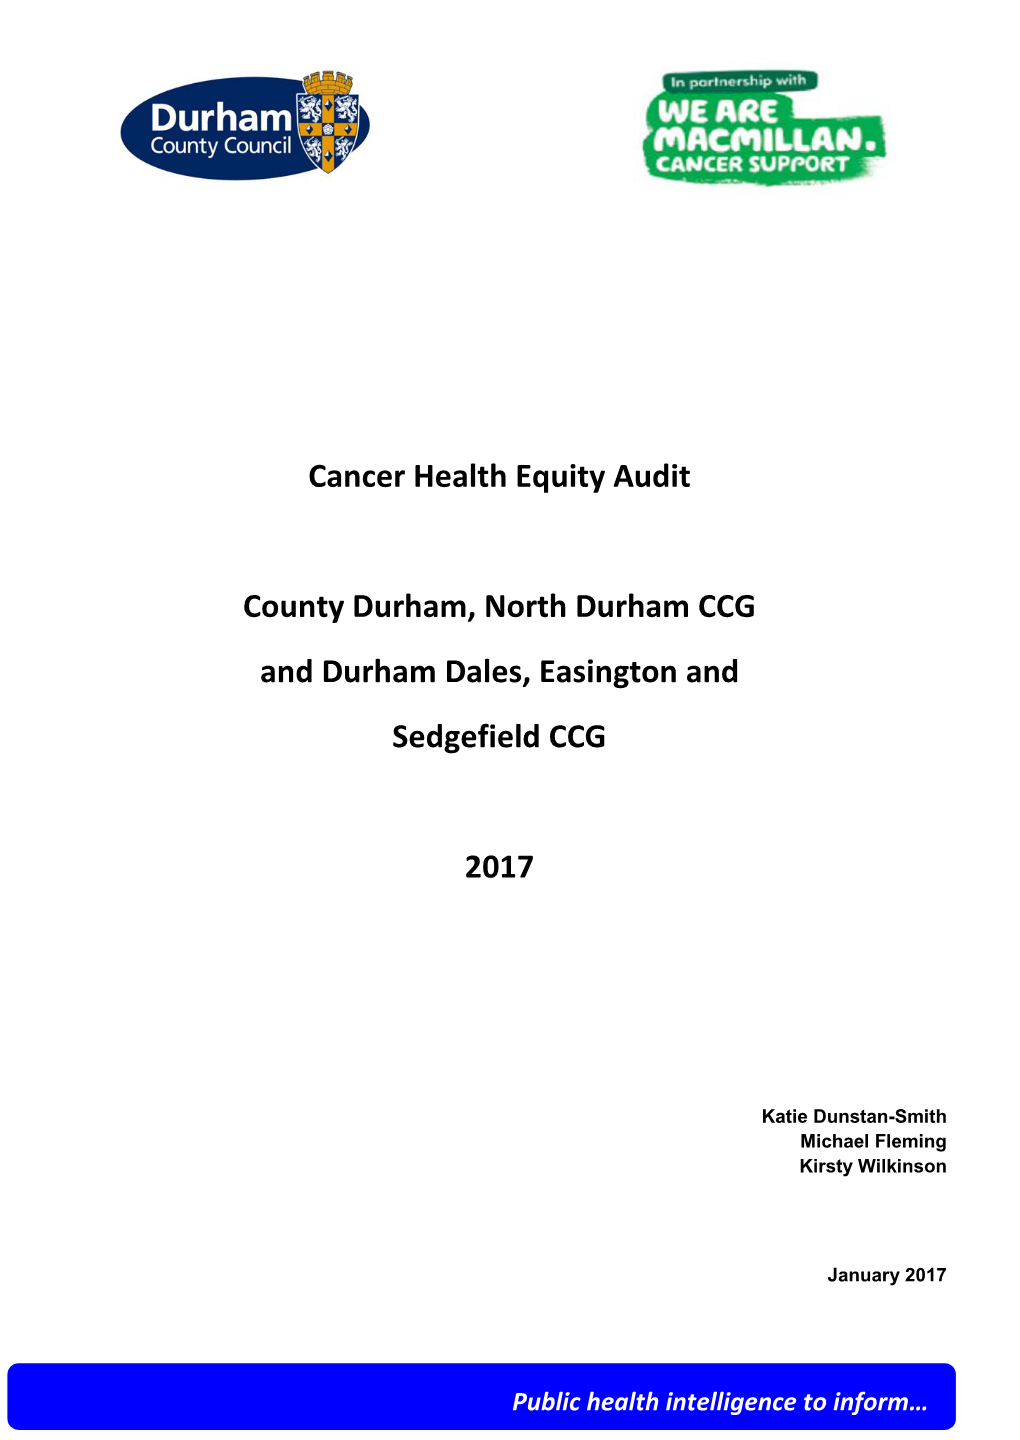 Cancer Health Equity Audit for County Durham 2017